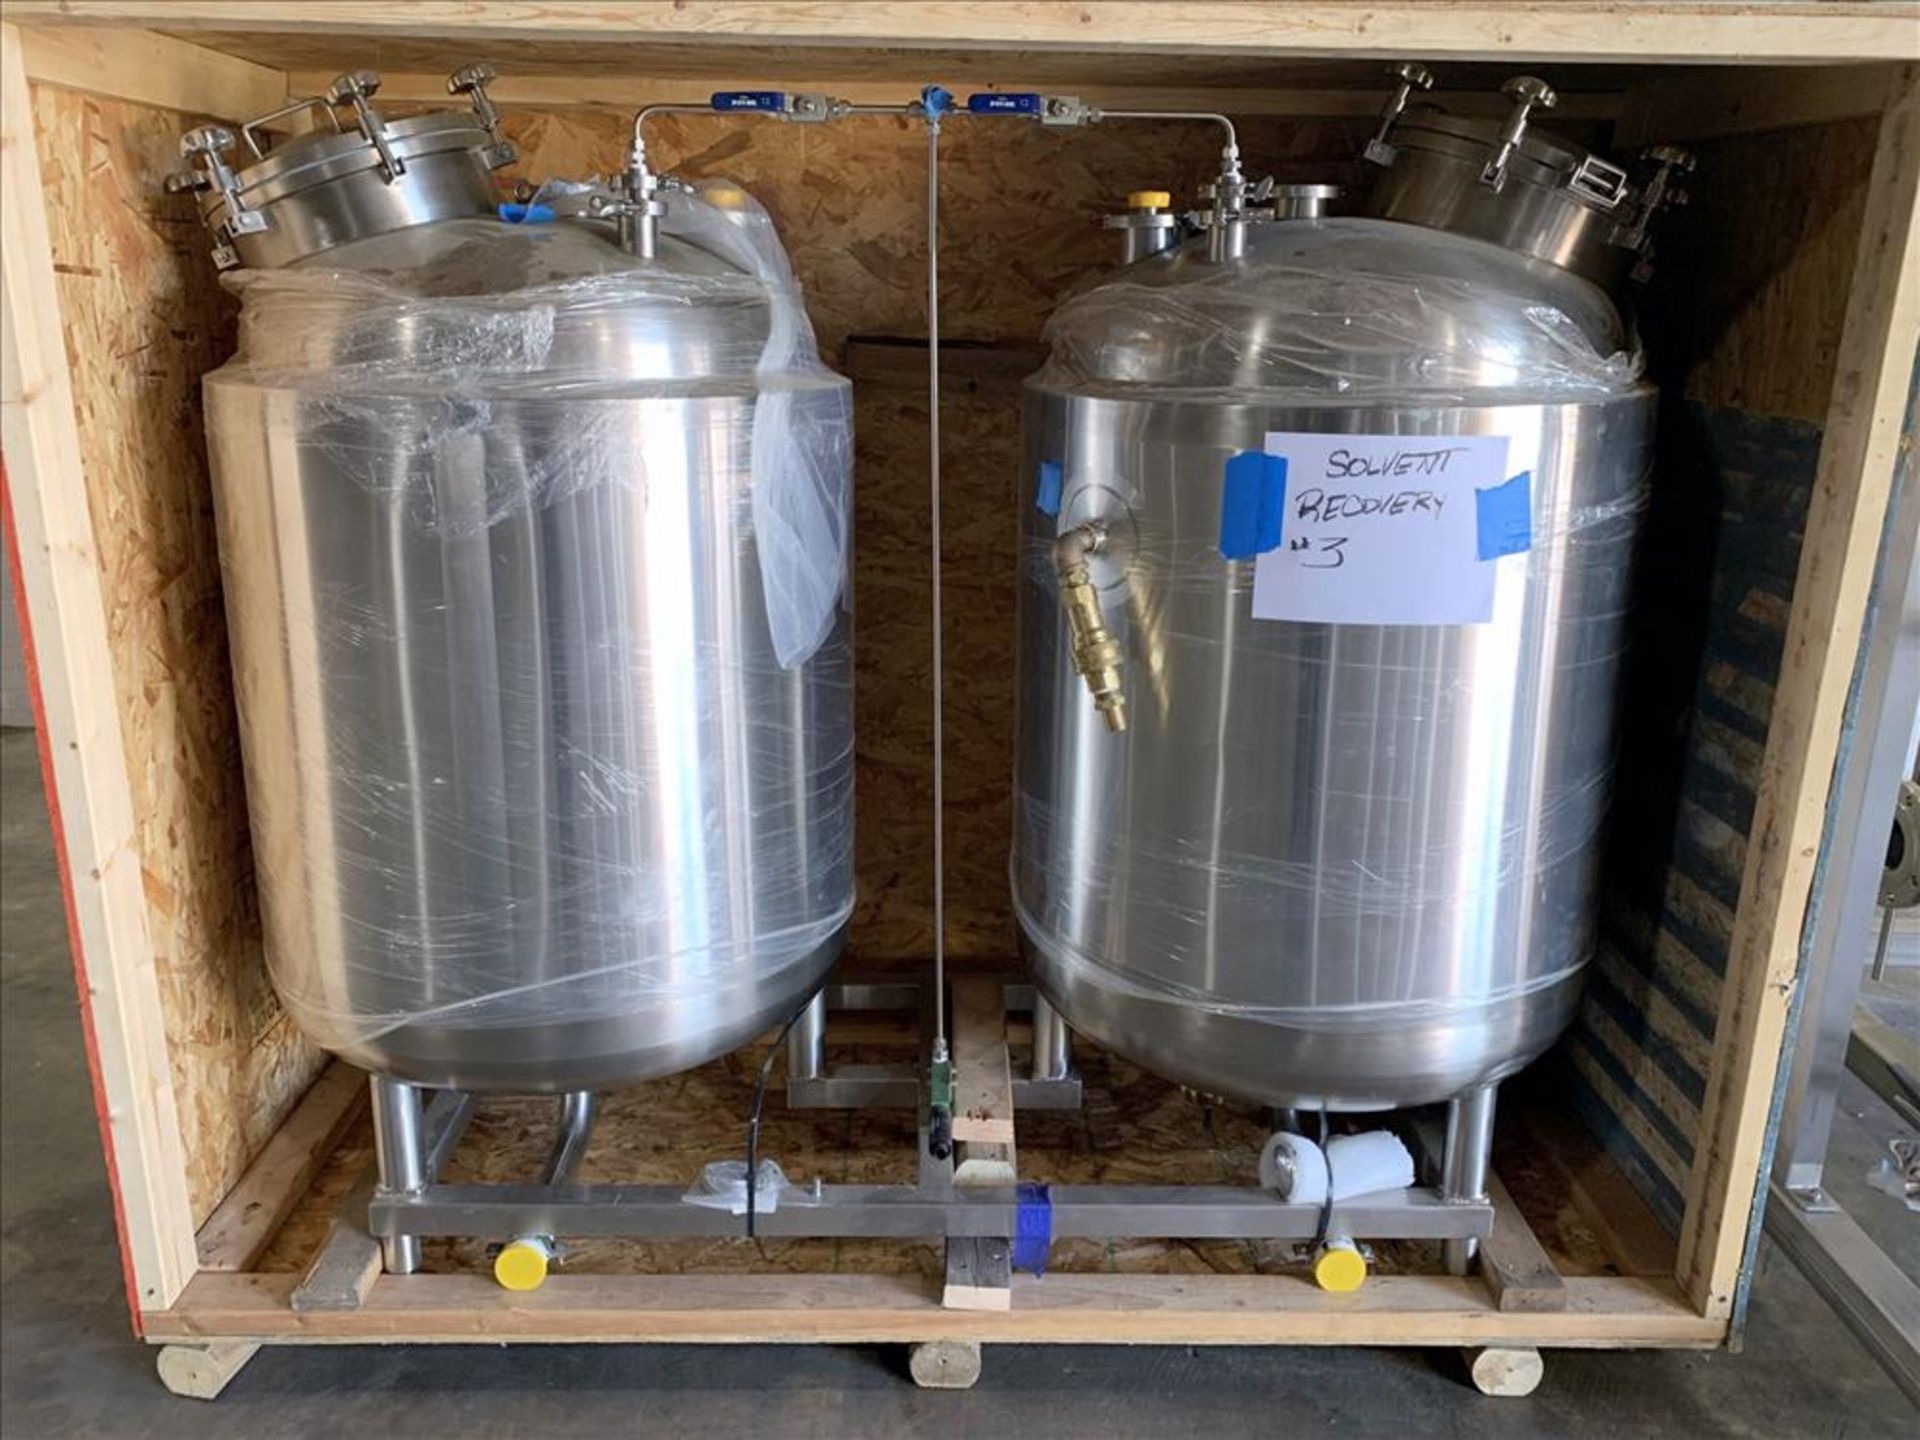 New In Crates - Eden Labs LLC Industrial 500 Gallon Performance Solvent Recovery System - Image 25 of 152